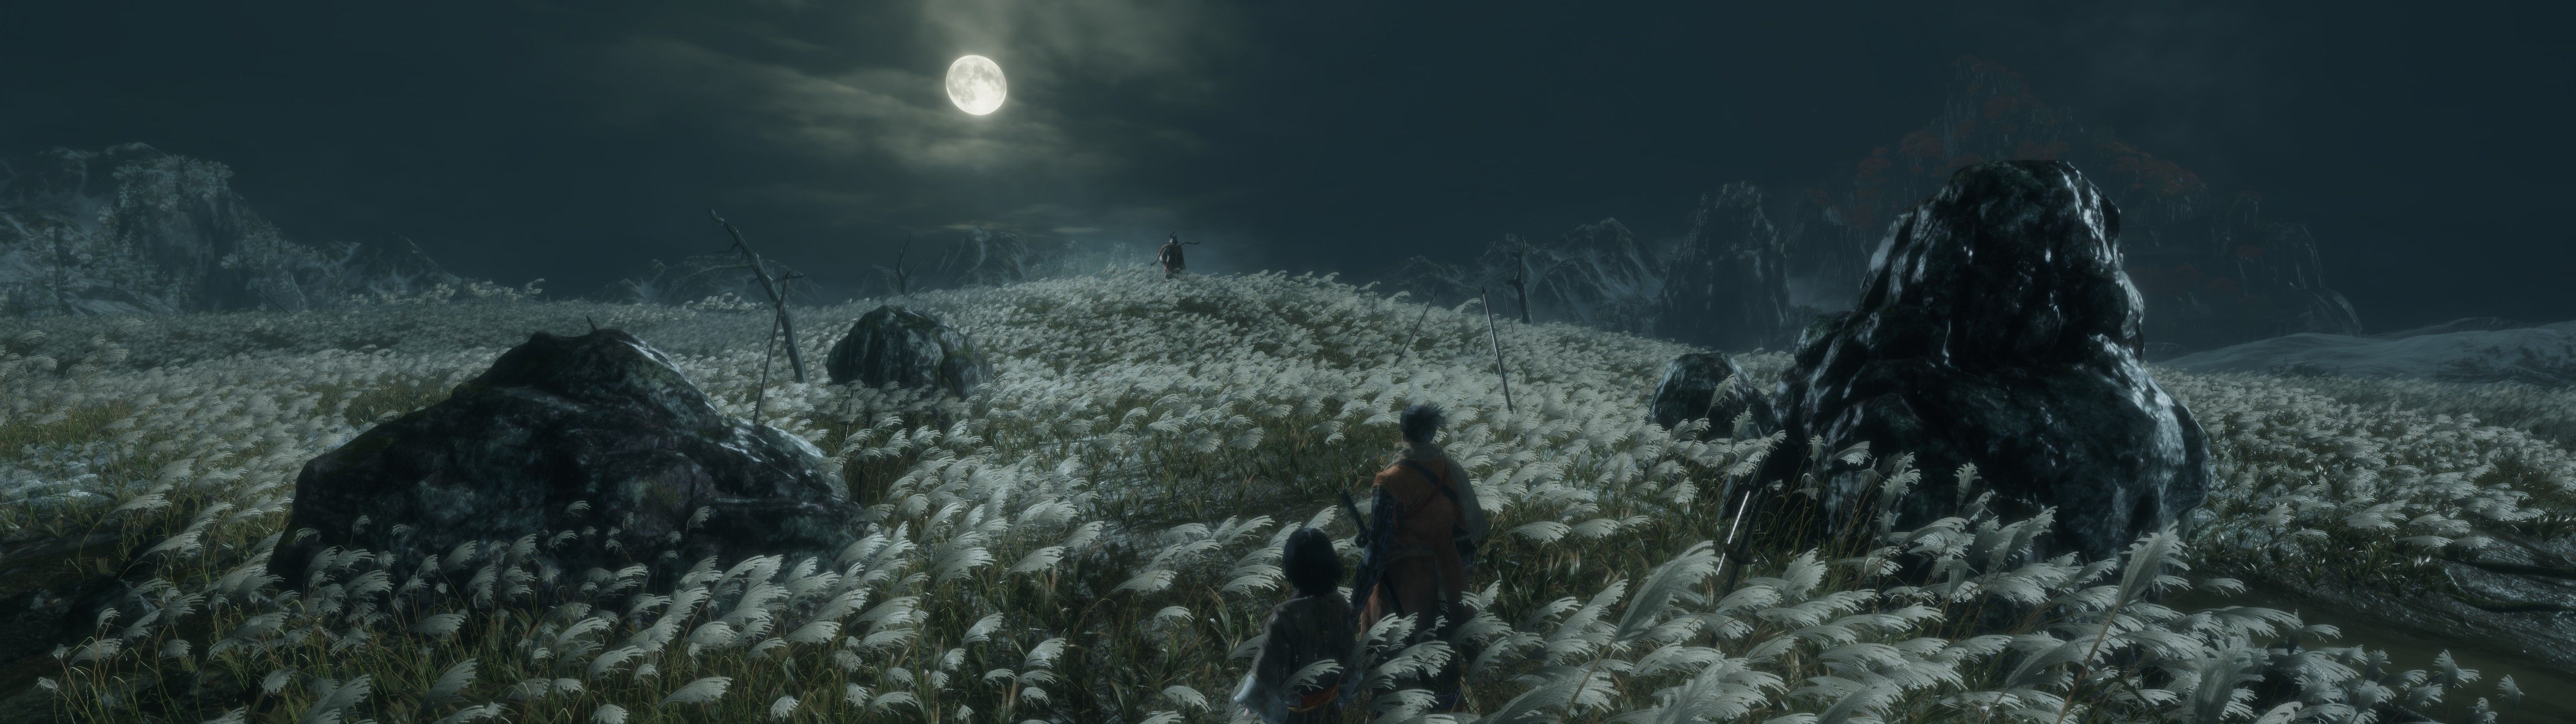 I played Sekiro on an ultrawide monitor, so I tried to take some screenshots of the sights for wallpaper material